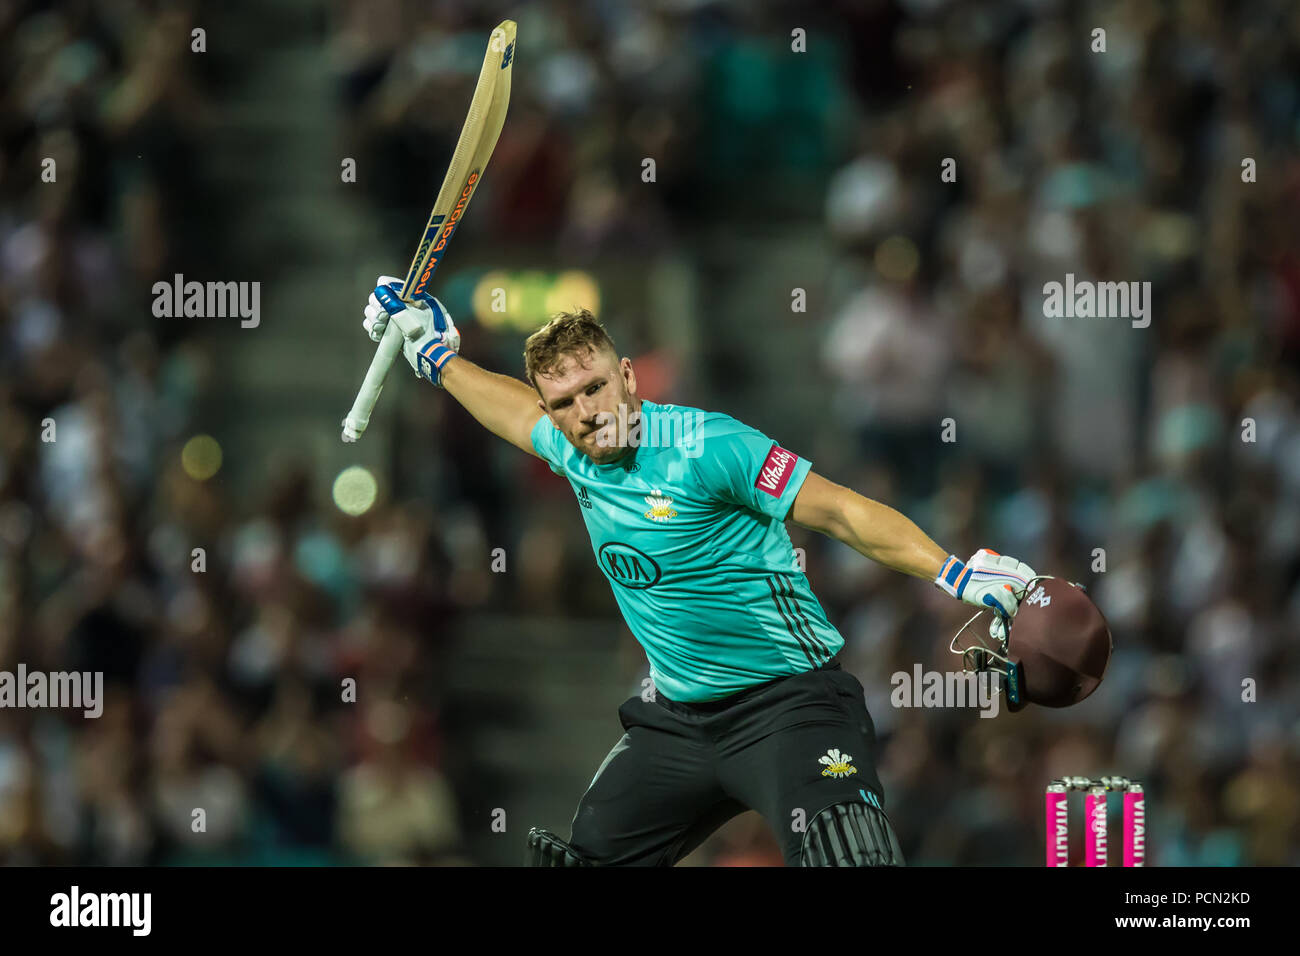 London, UK. 3 August, 2018. Aaron Finch celebrates after reaching his100 batting for Surrey against  Middlesex in the Vitality T20 Blast match at the Kia Oval. David Rowe/Alamy Live News Stock Photo